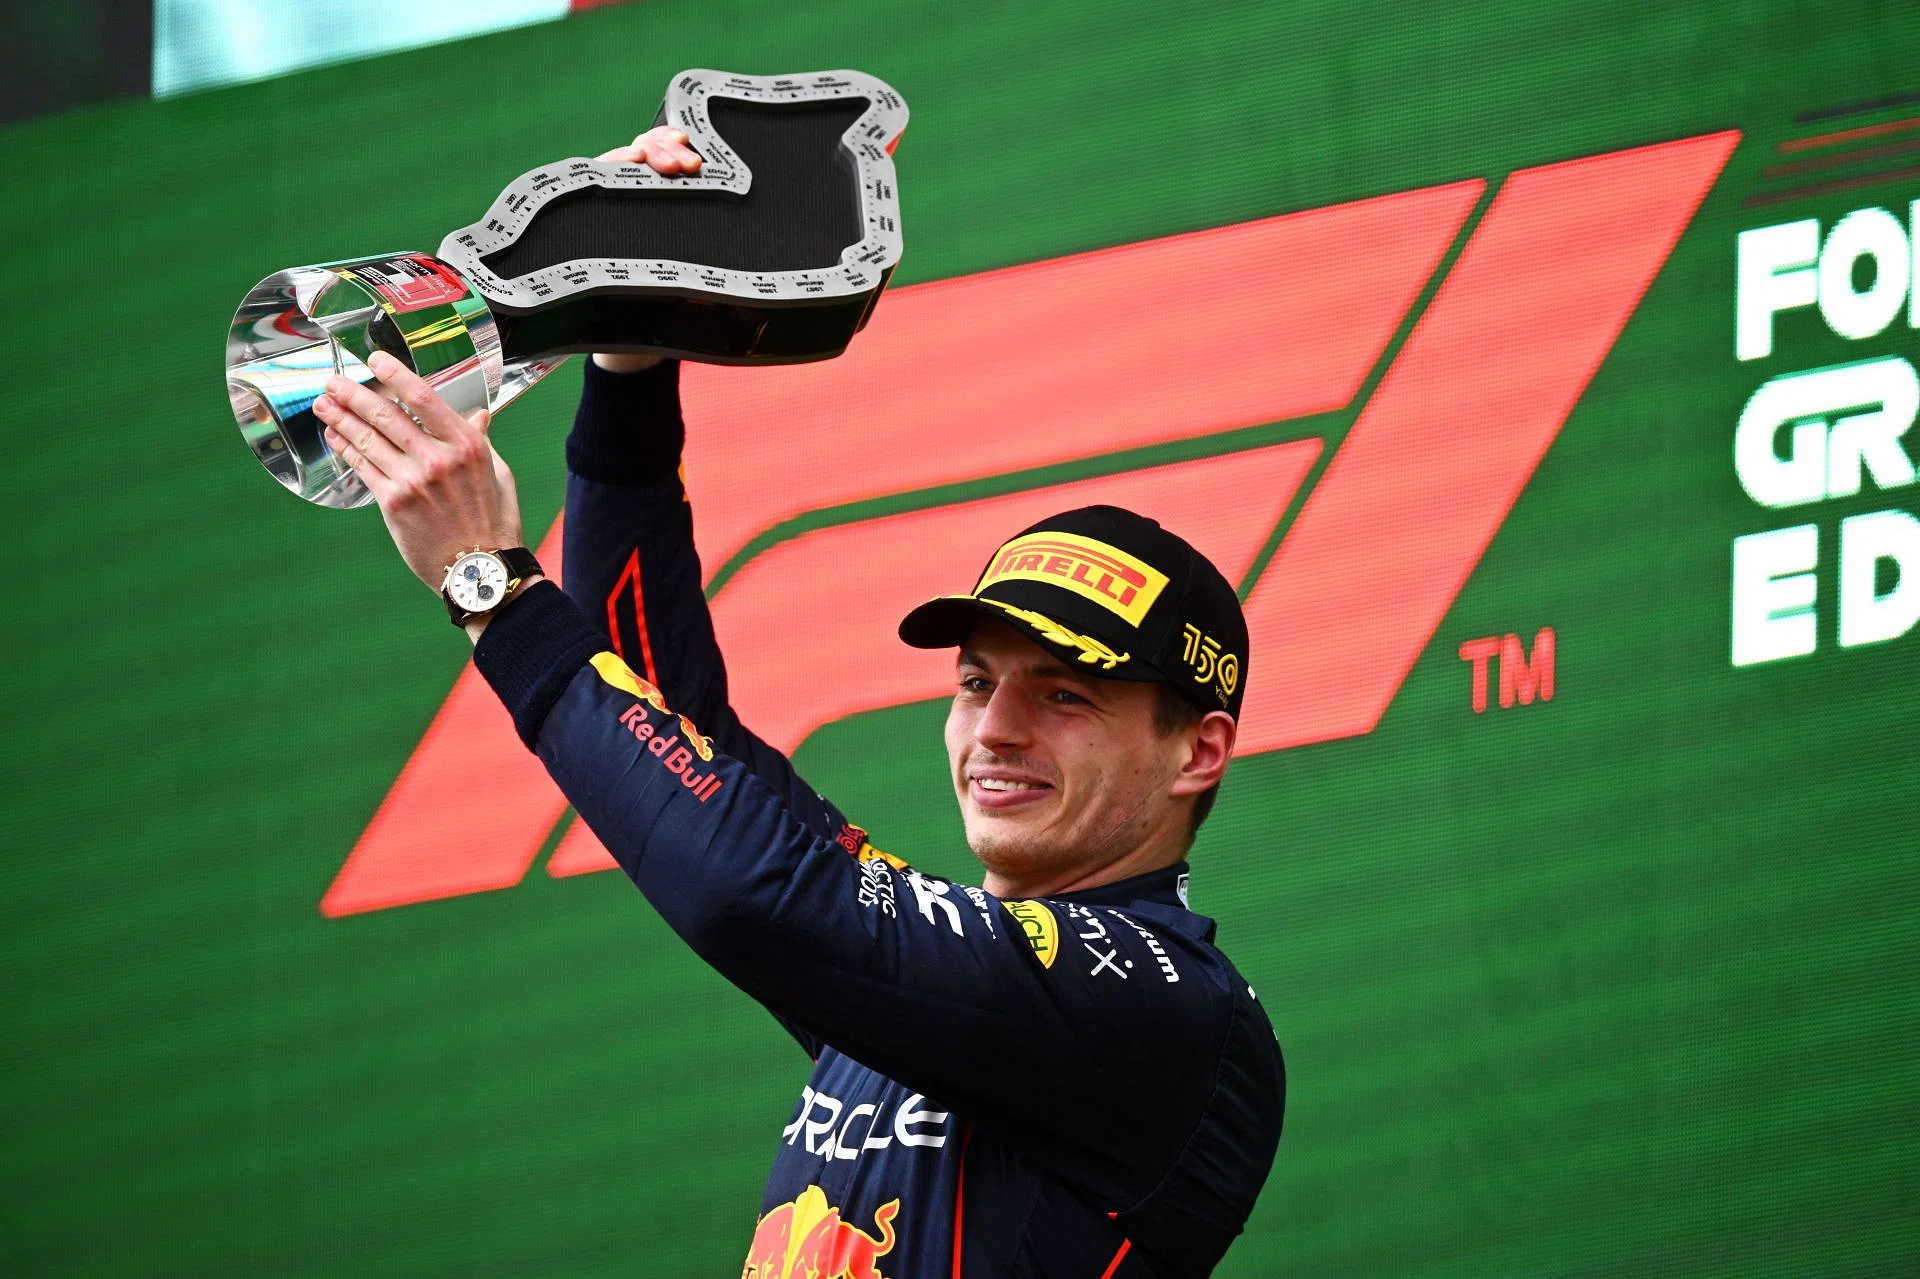 Max Verstappen Thanks Hulkenberg for Critical Help at Imola Qualifying